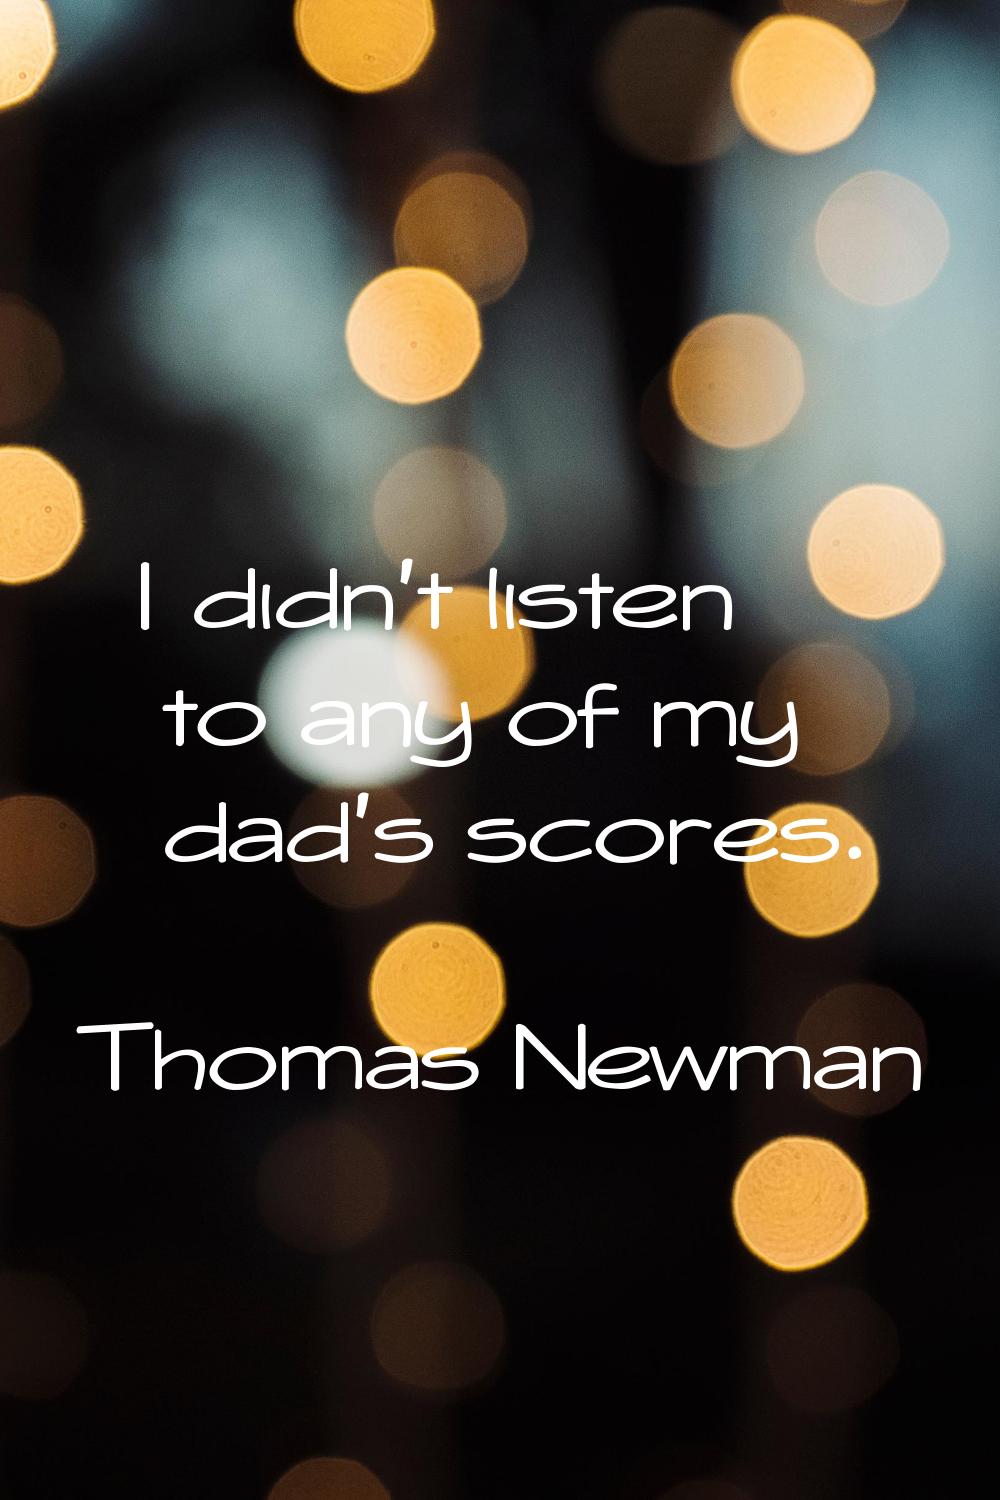 I didn't listen to any of my dad's scores.